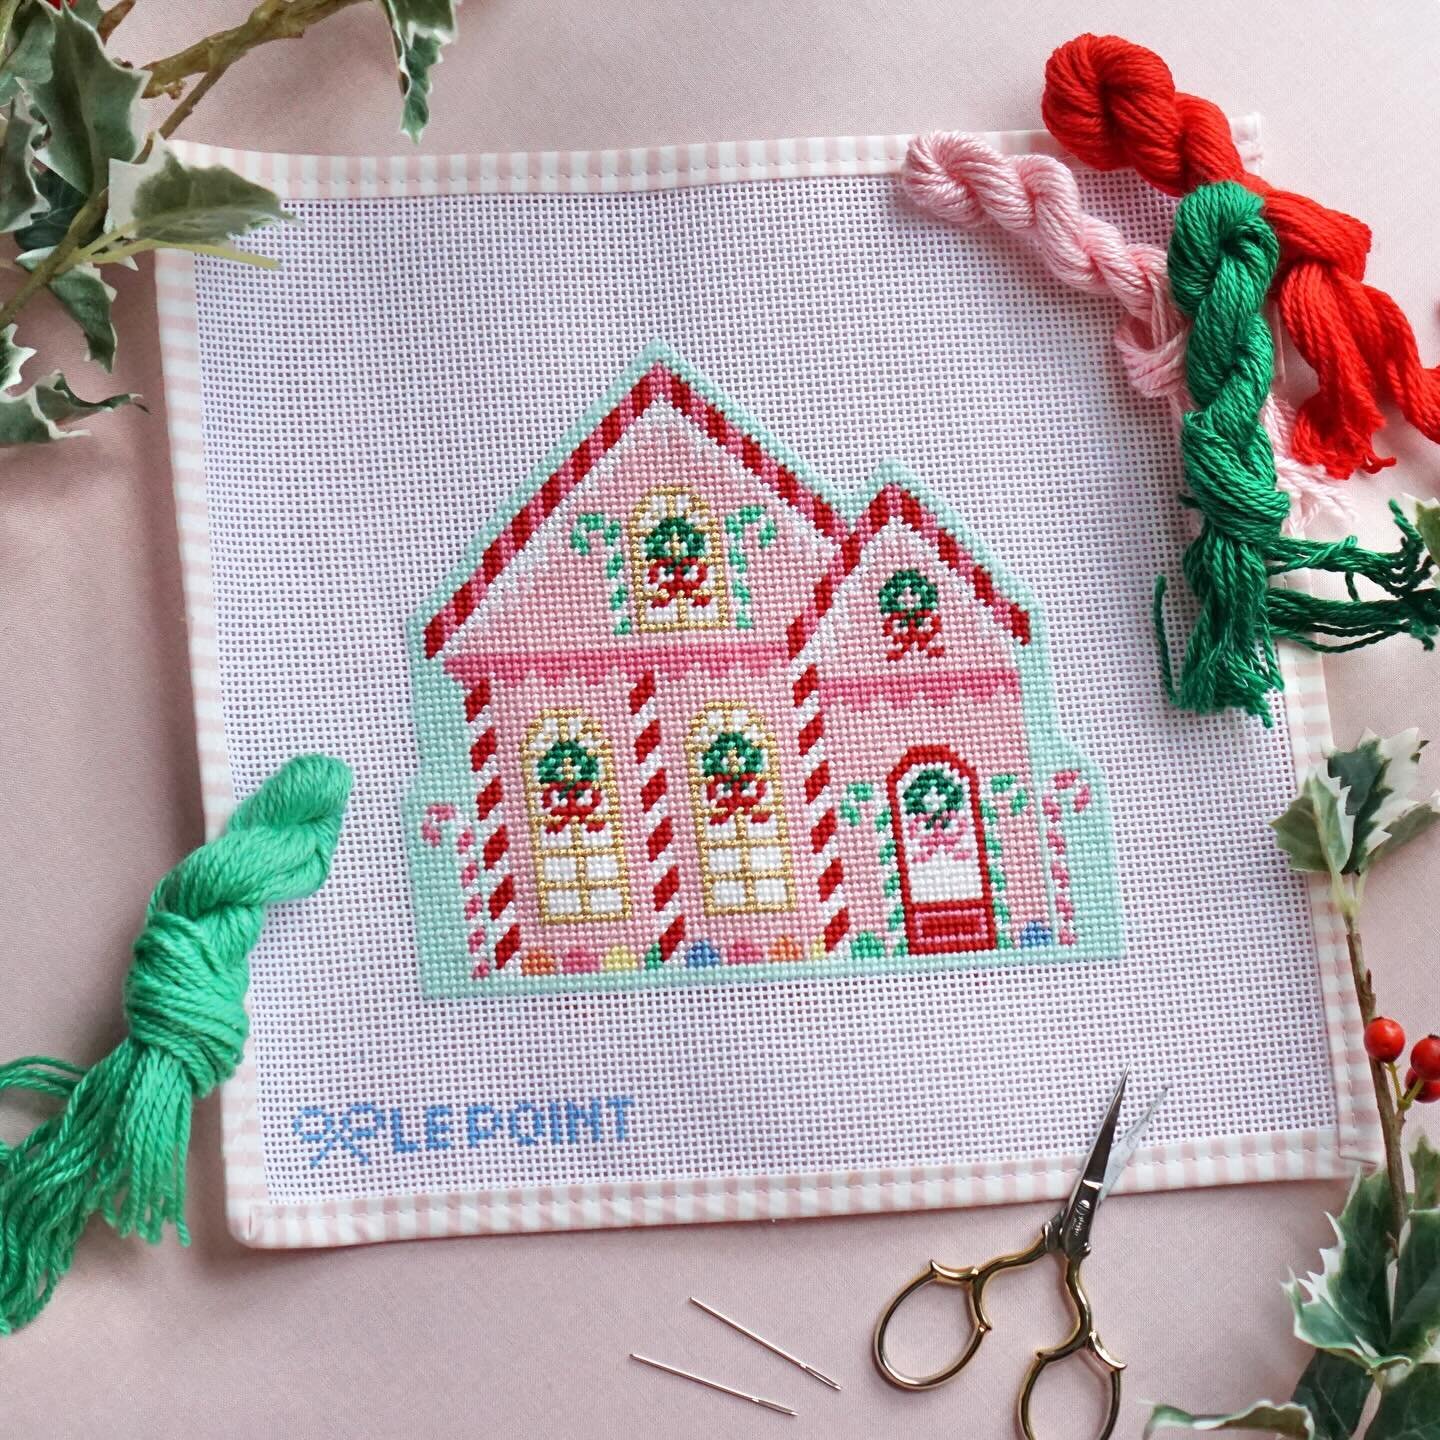 How To Needlepoint: Learn the Basic Stitches — Le Point Studio